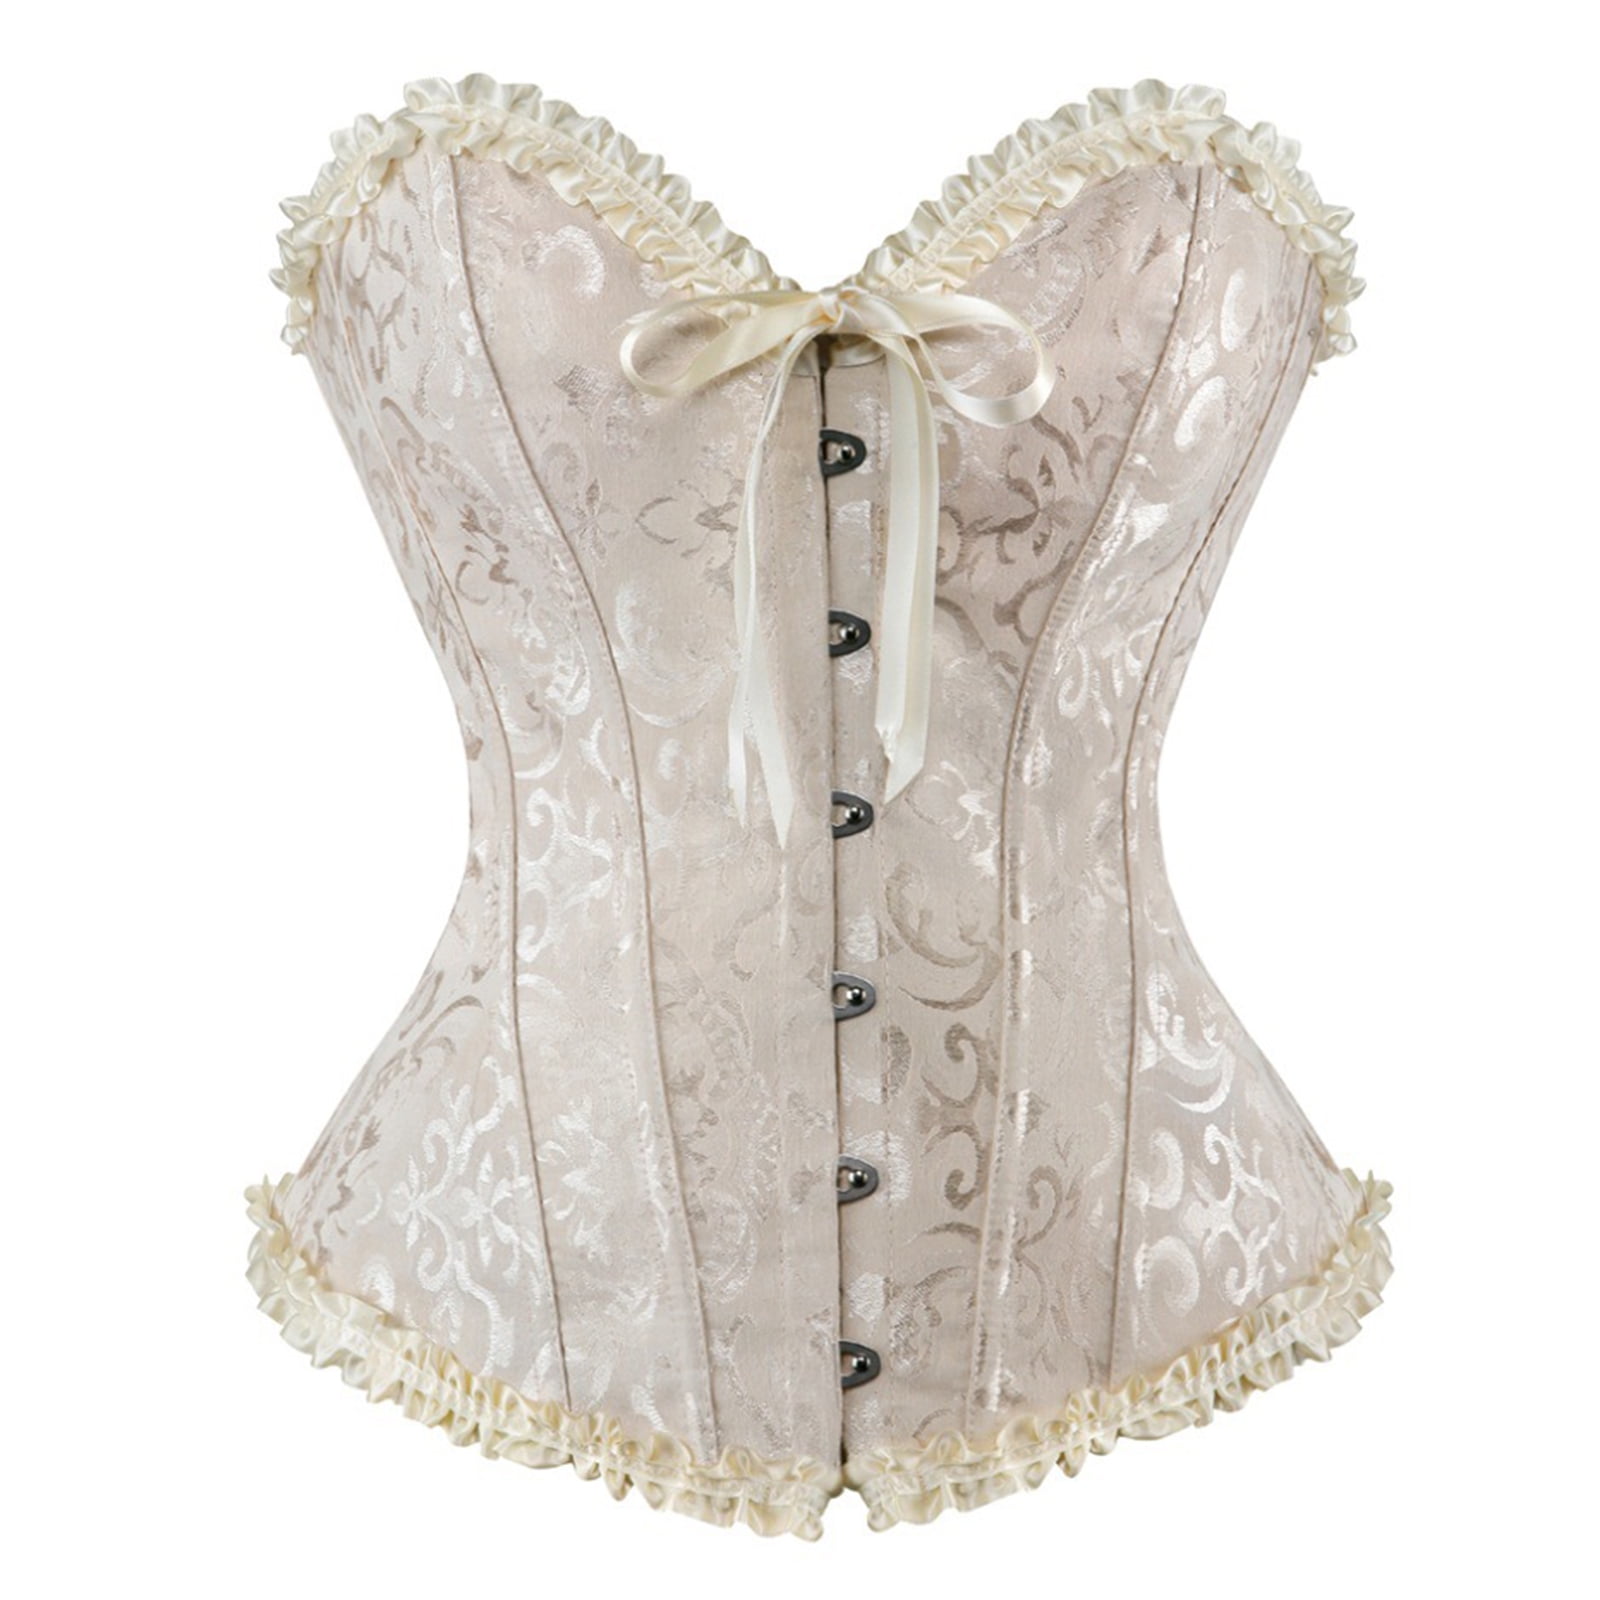 Cupless Corset Clothing Shoes Jewelry